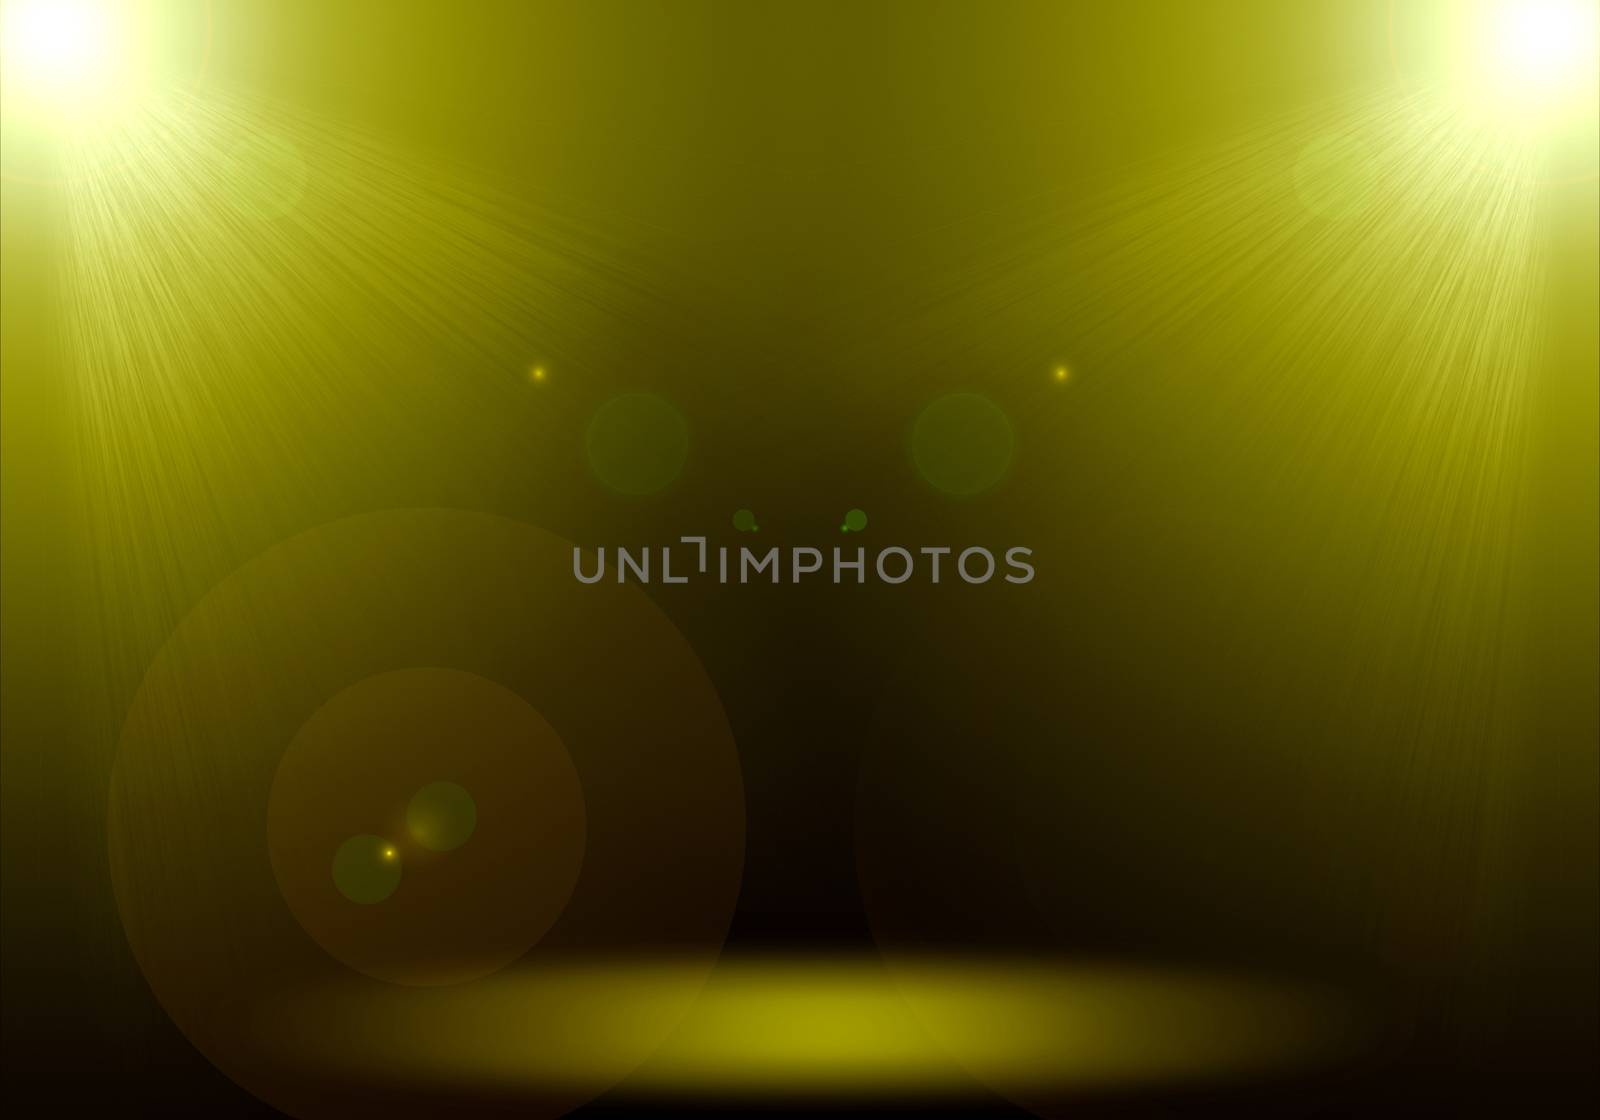 Abstract image of gold lighting flare 2 spotlight on the floor s by jayzynism